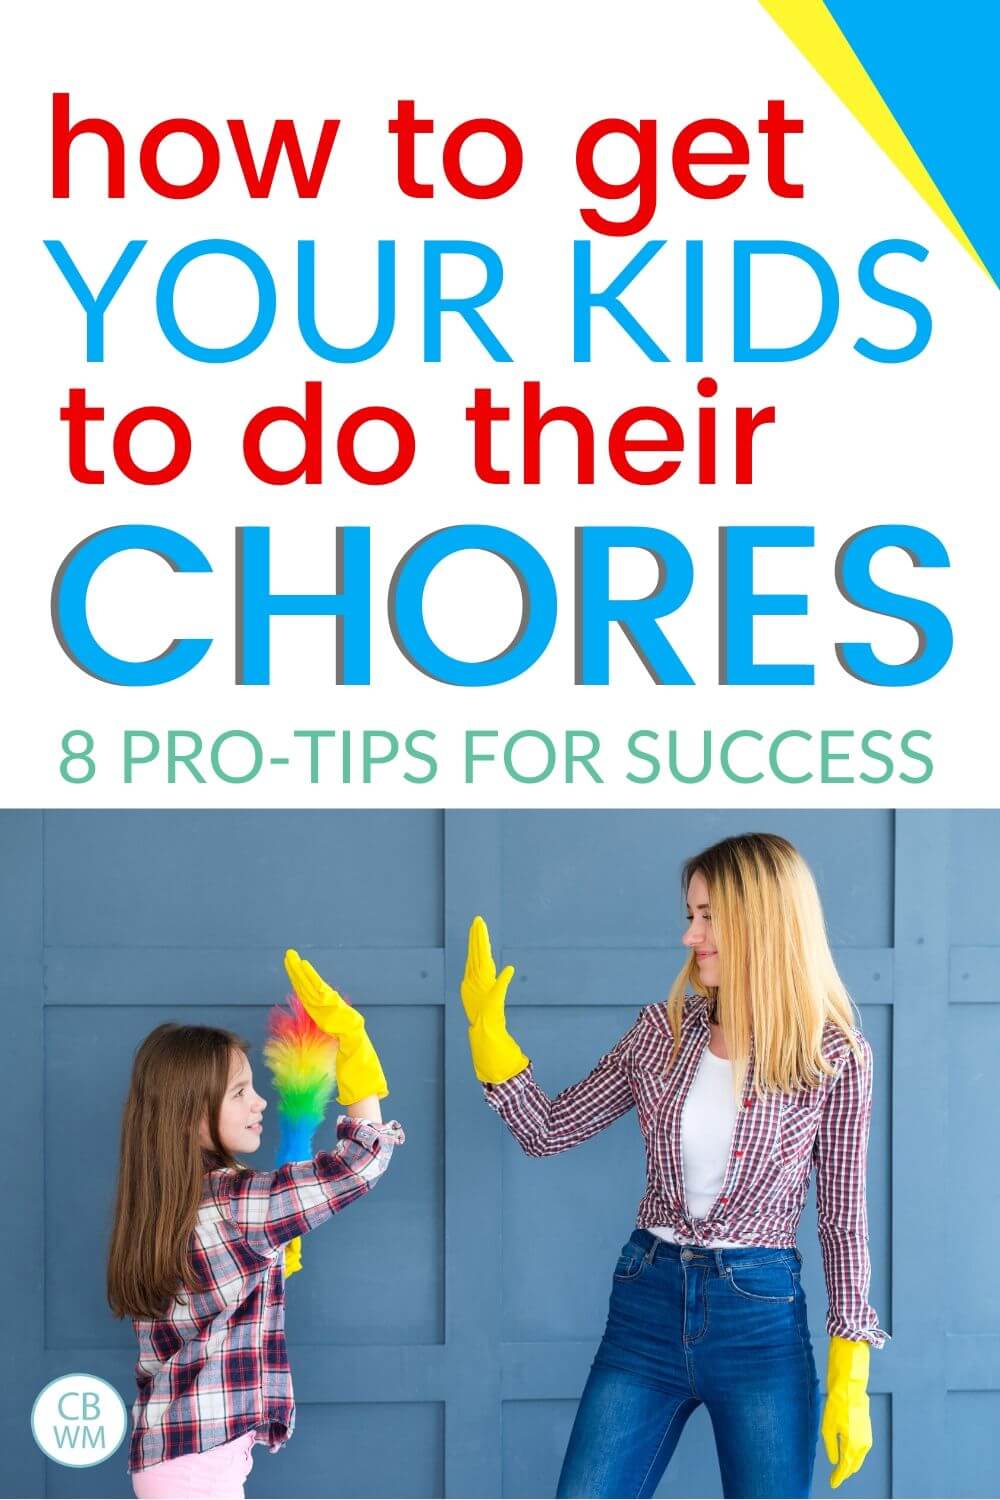 how to get your kids to do chores pinnable image